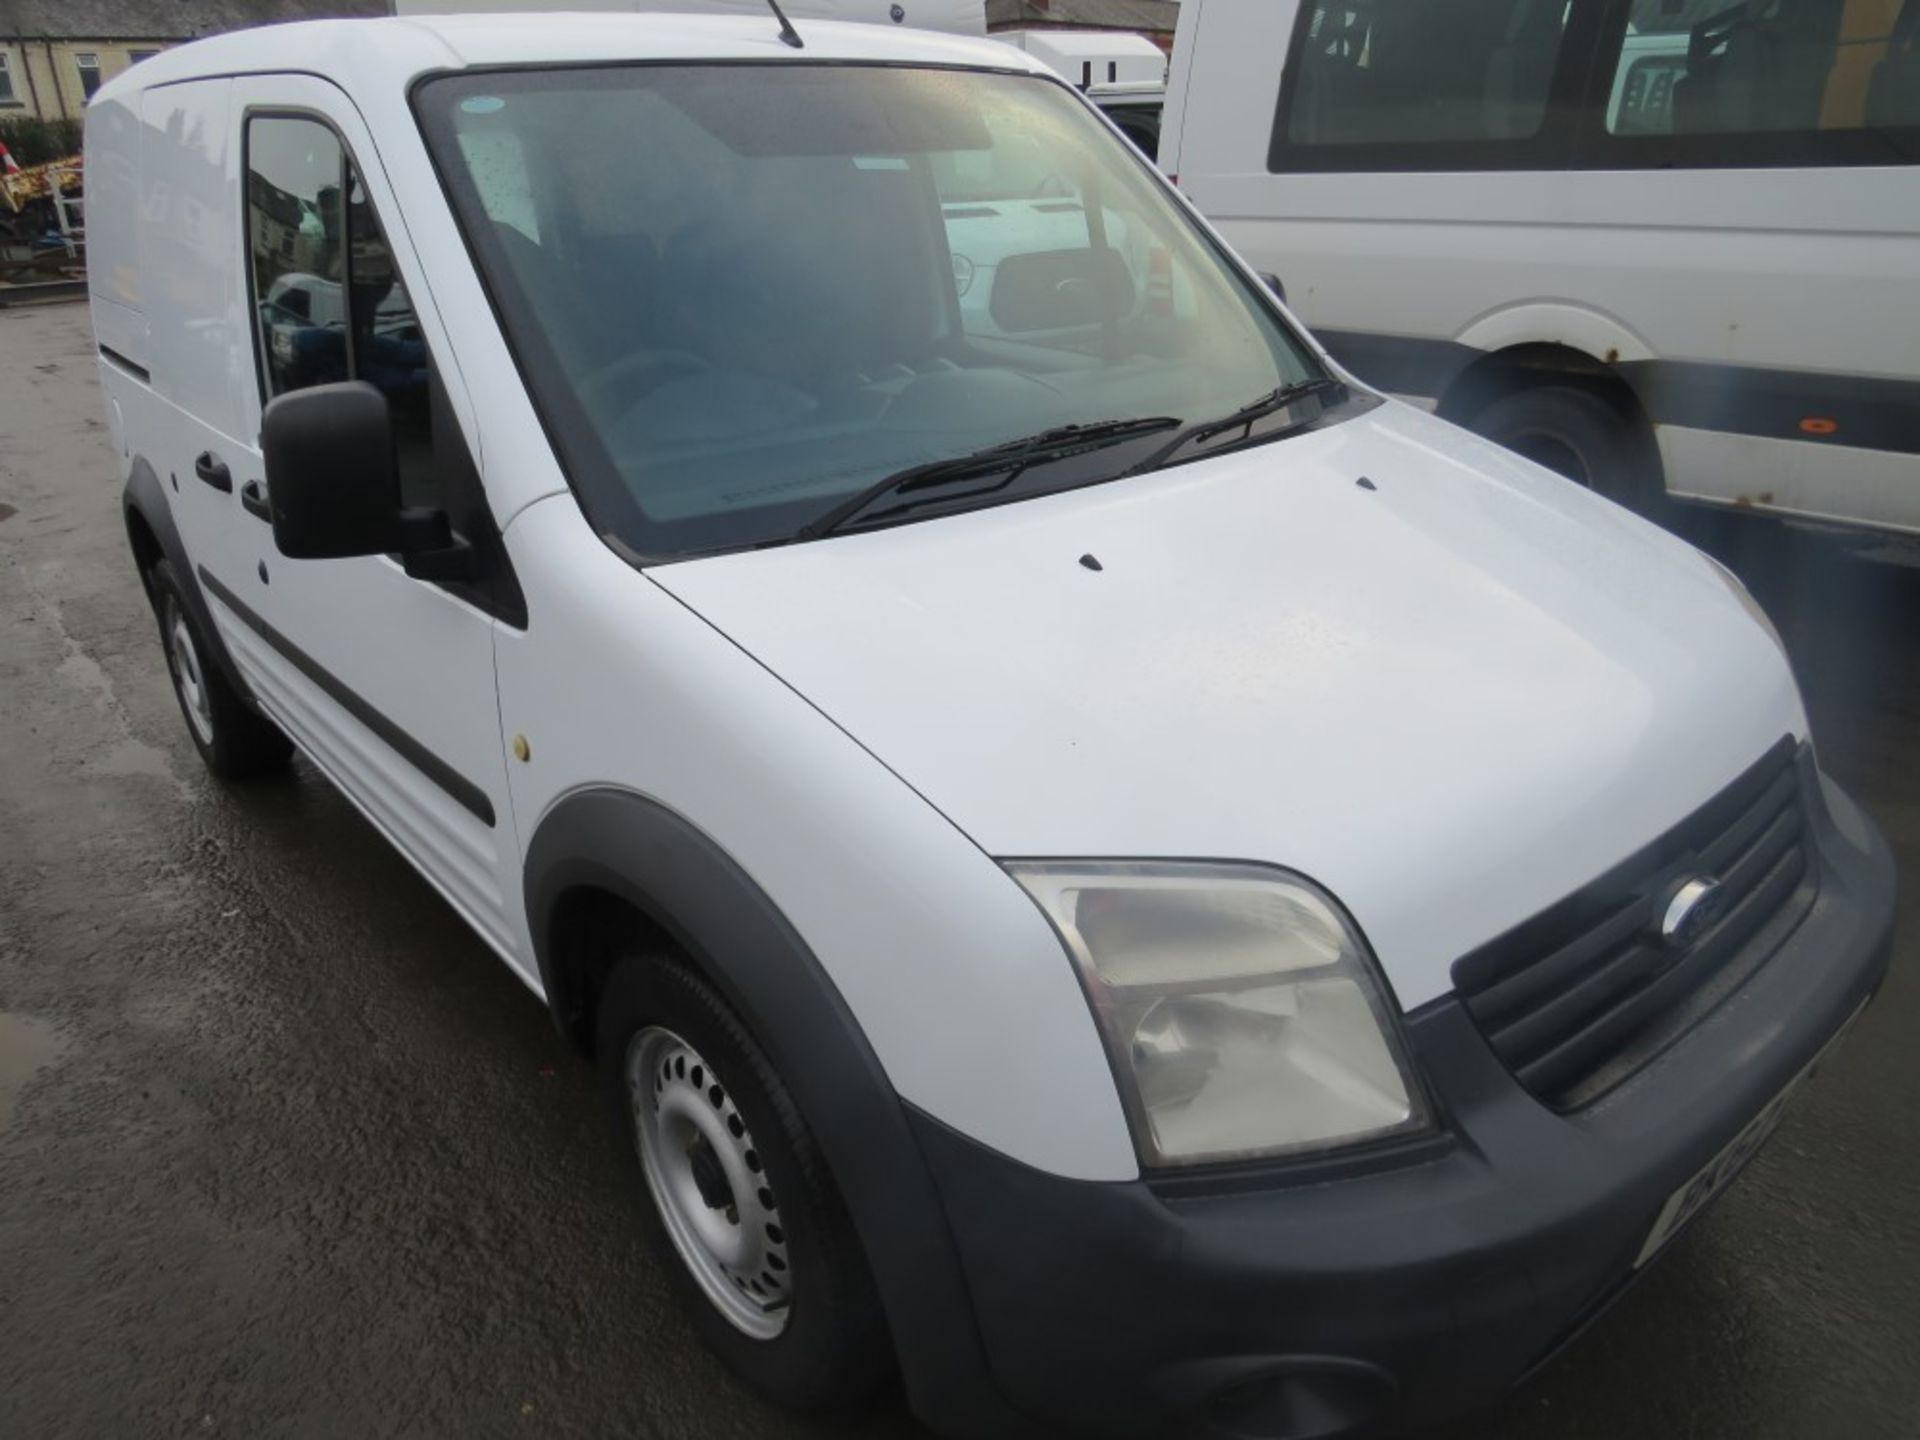 62 reg FORD TRANSIT CONNECT T220 CREW VAN, 1ST REG 10/12, 100065M WARRANTED, V5 HERE, 1 OWNER FROM